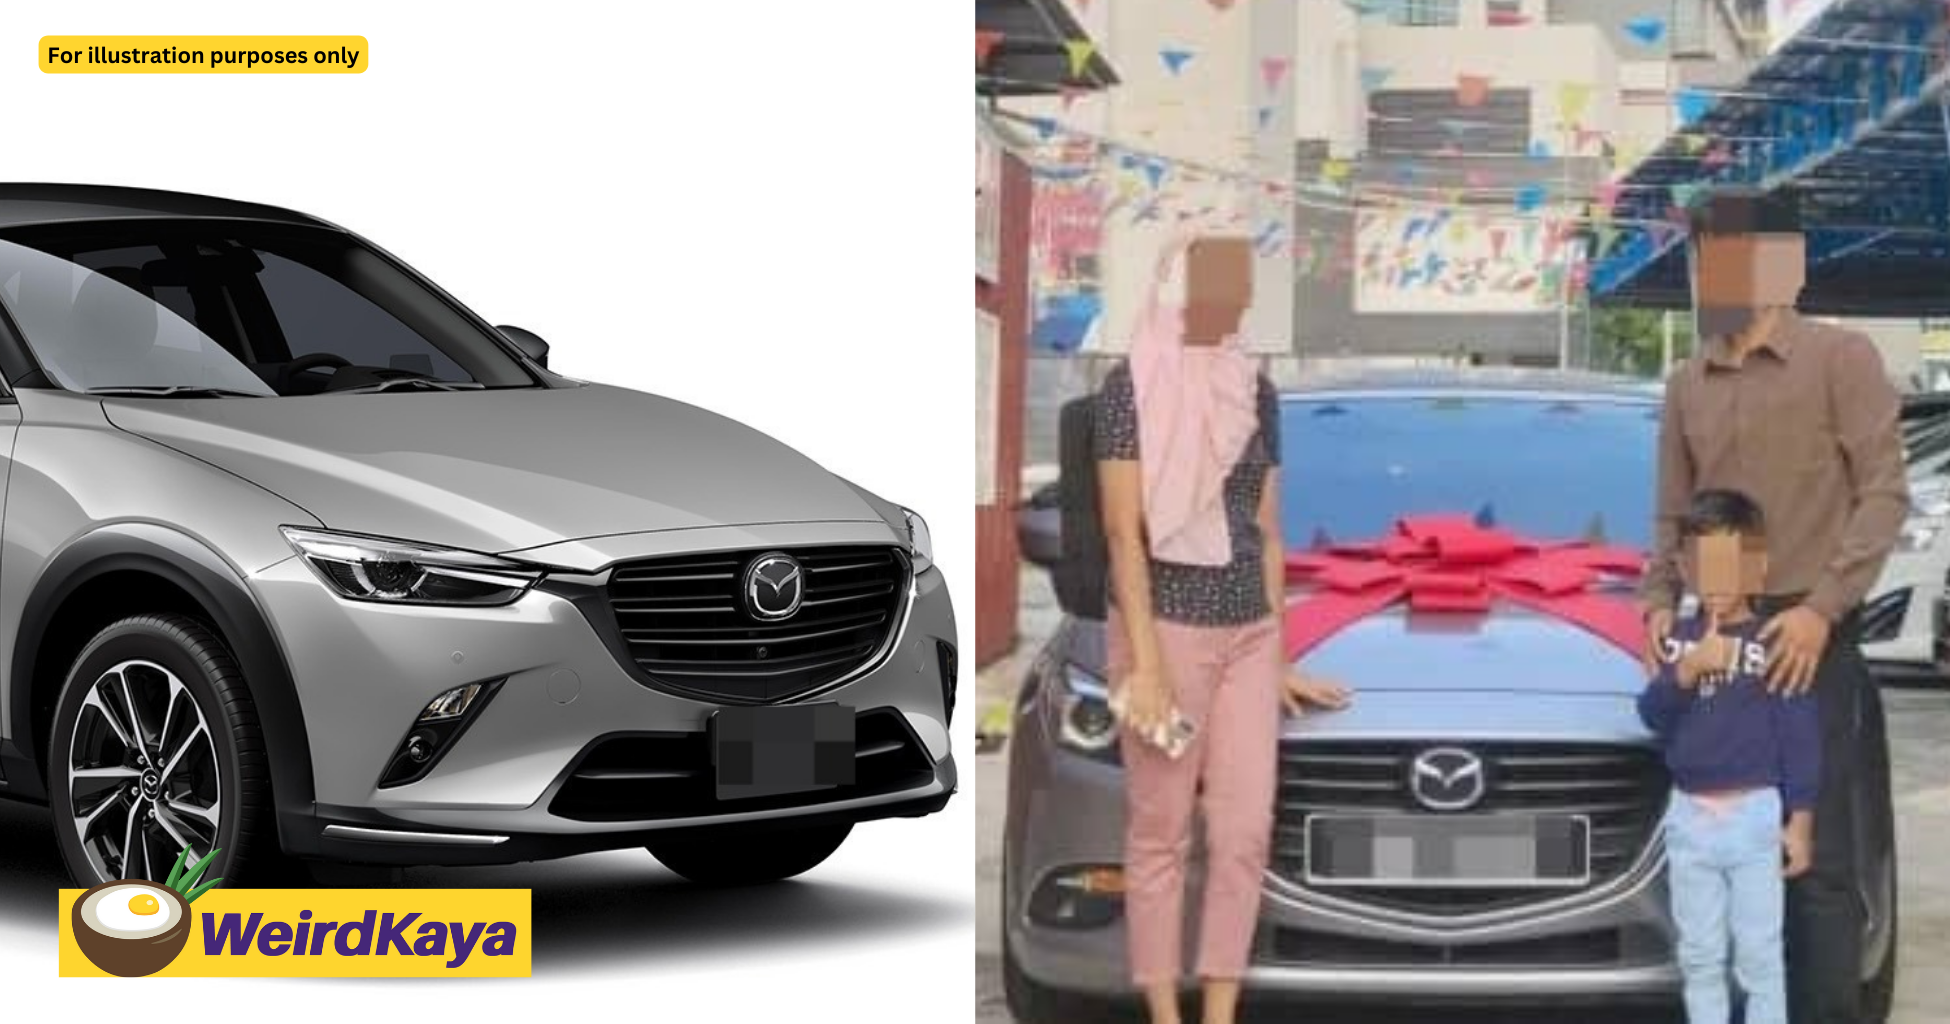 Foreign worker buys mazda in m'sia after bank approves loan in just one day | weirdkaya